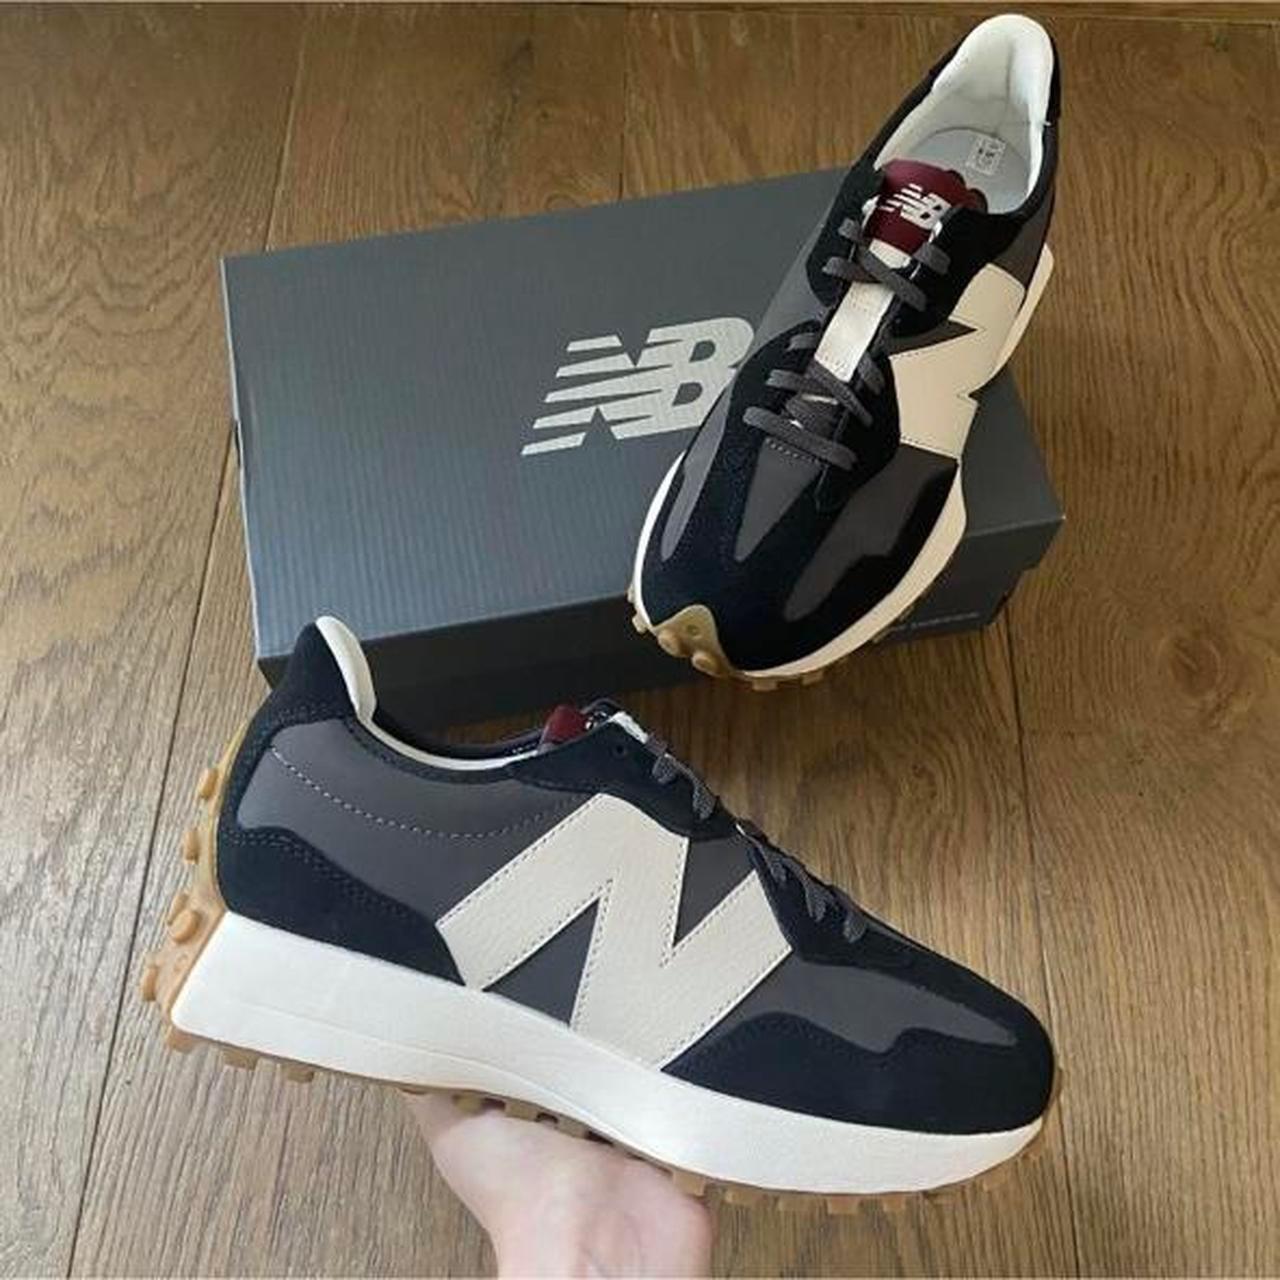 New Balance 327 trainers in black and dark grey with... - Depop